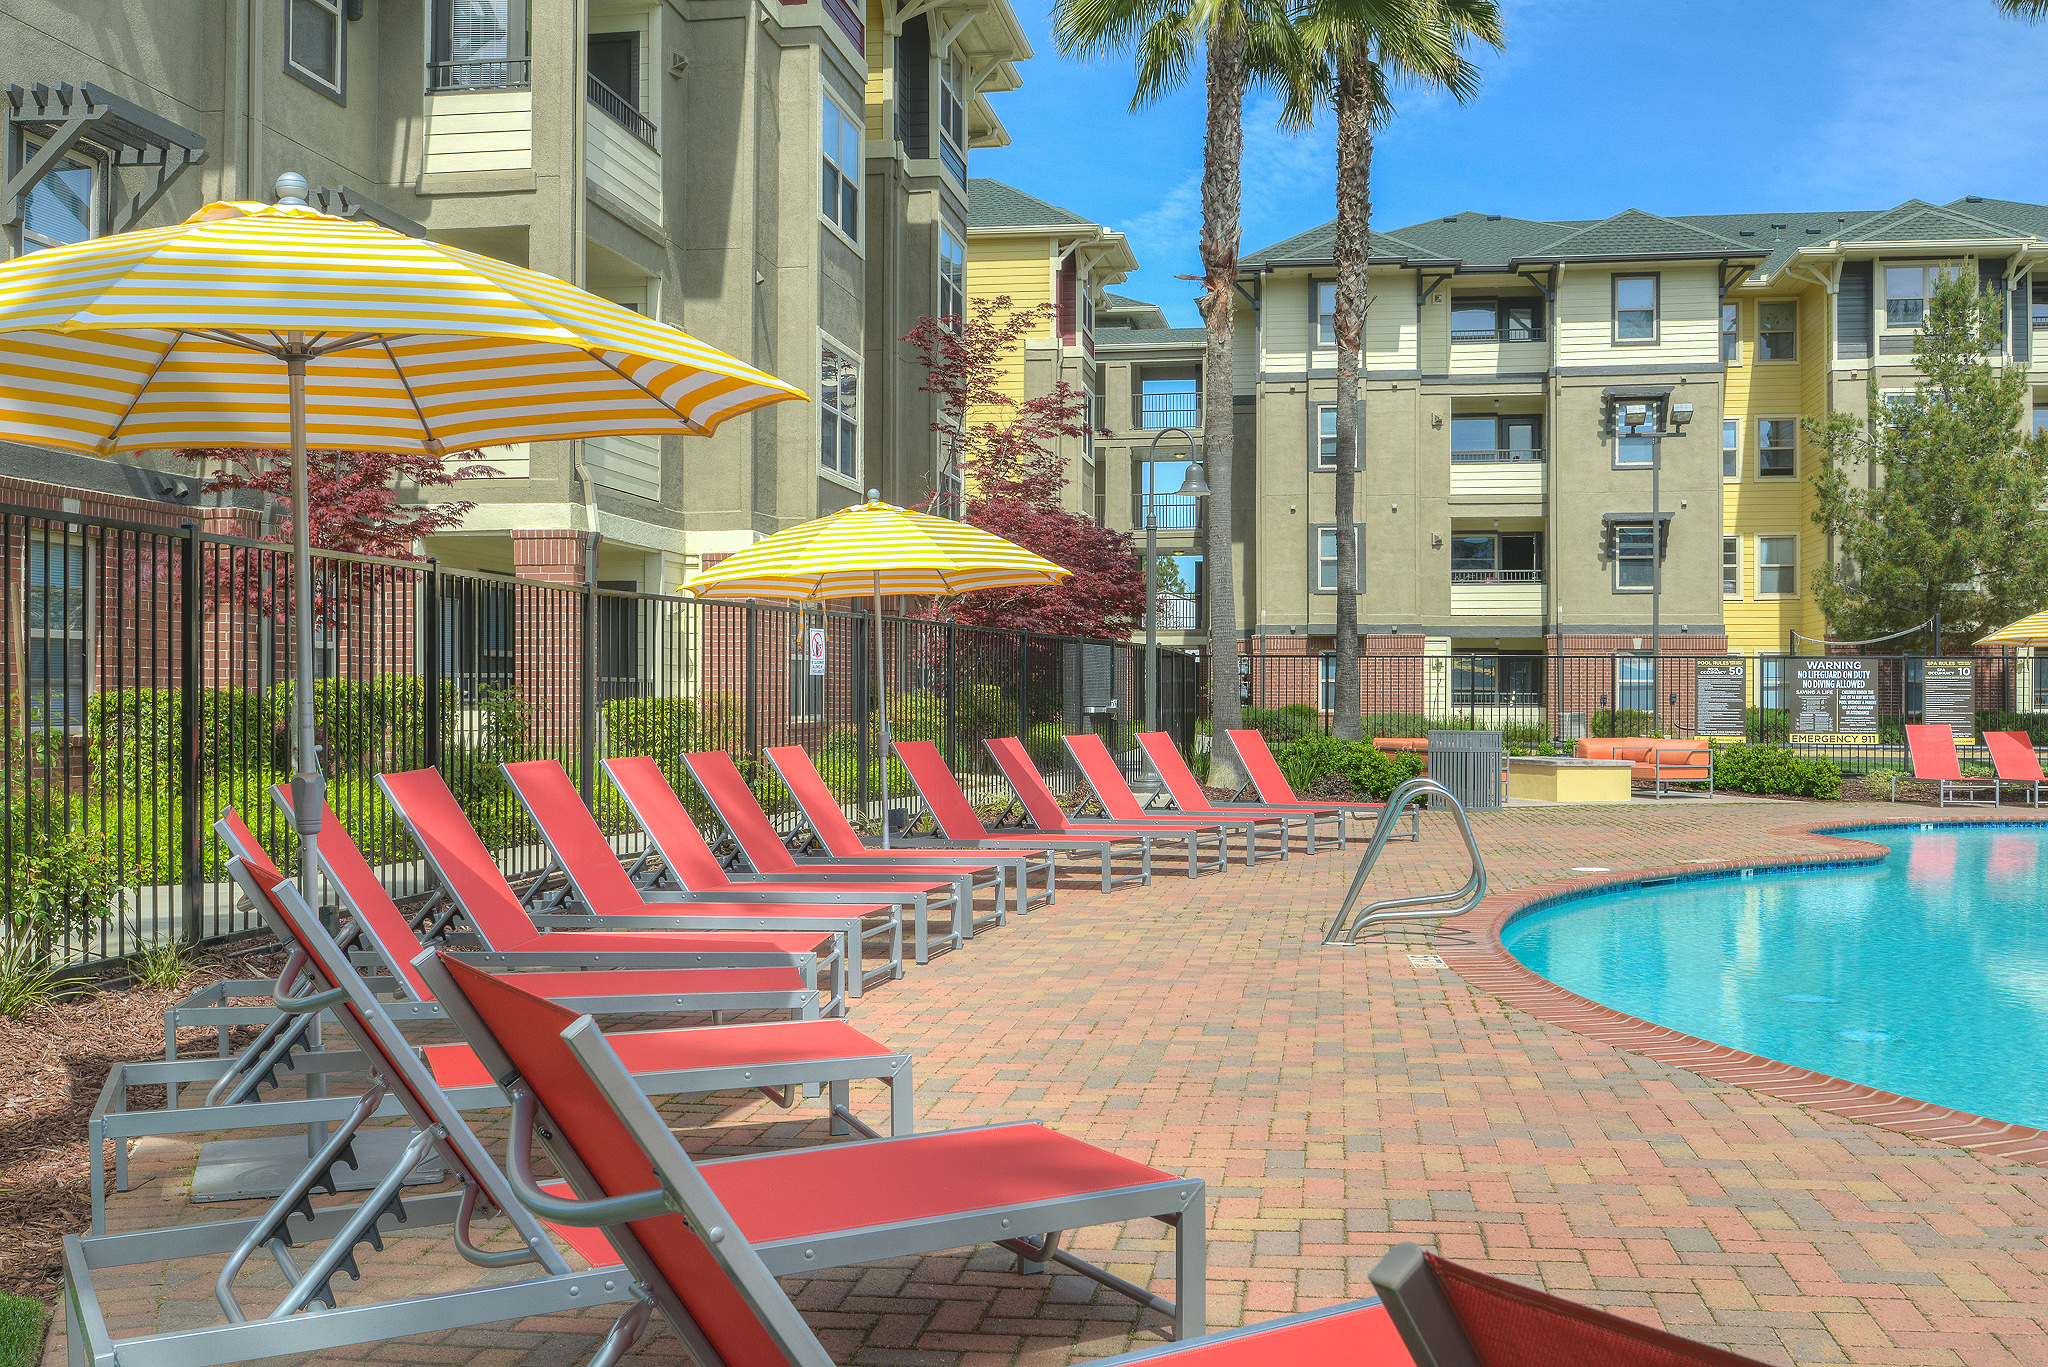 Exterior of pool with brick pool deck rimmed with lounge chairs with 4-story apartment buildings in background